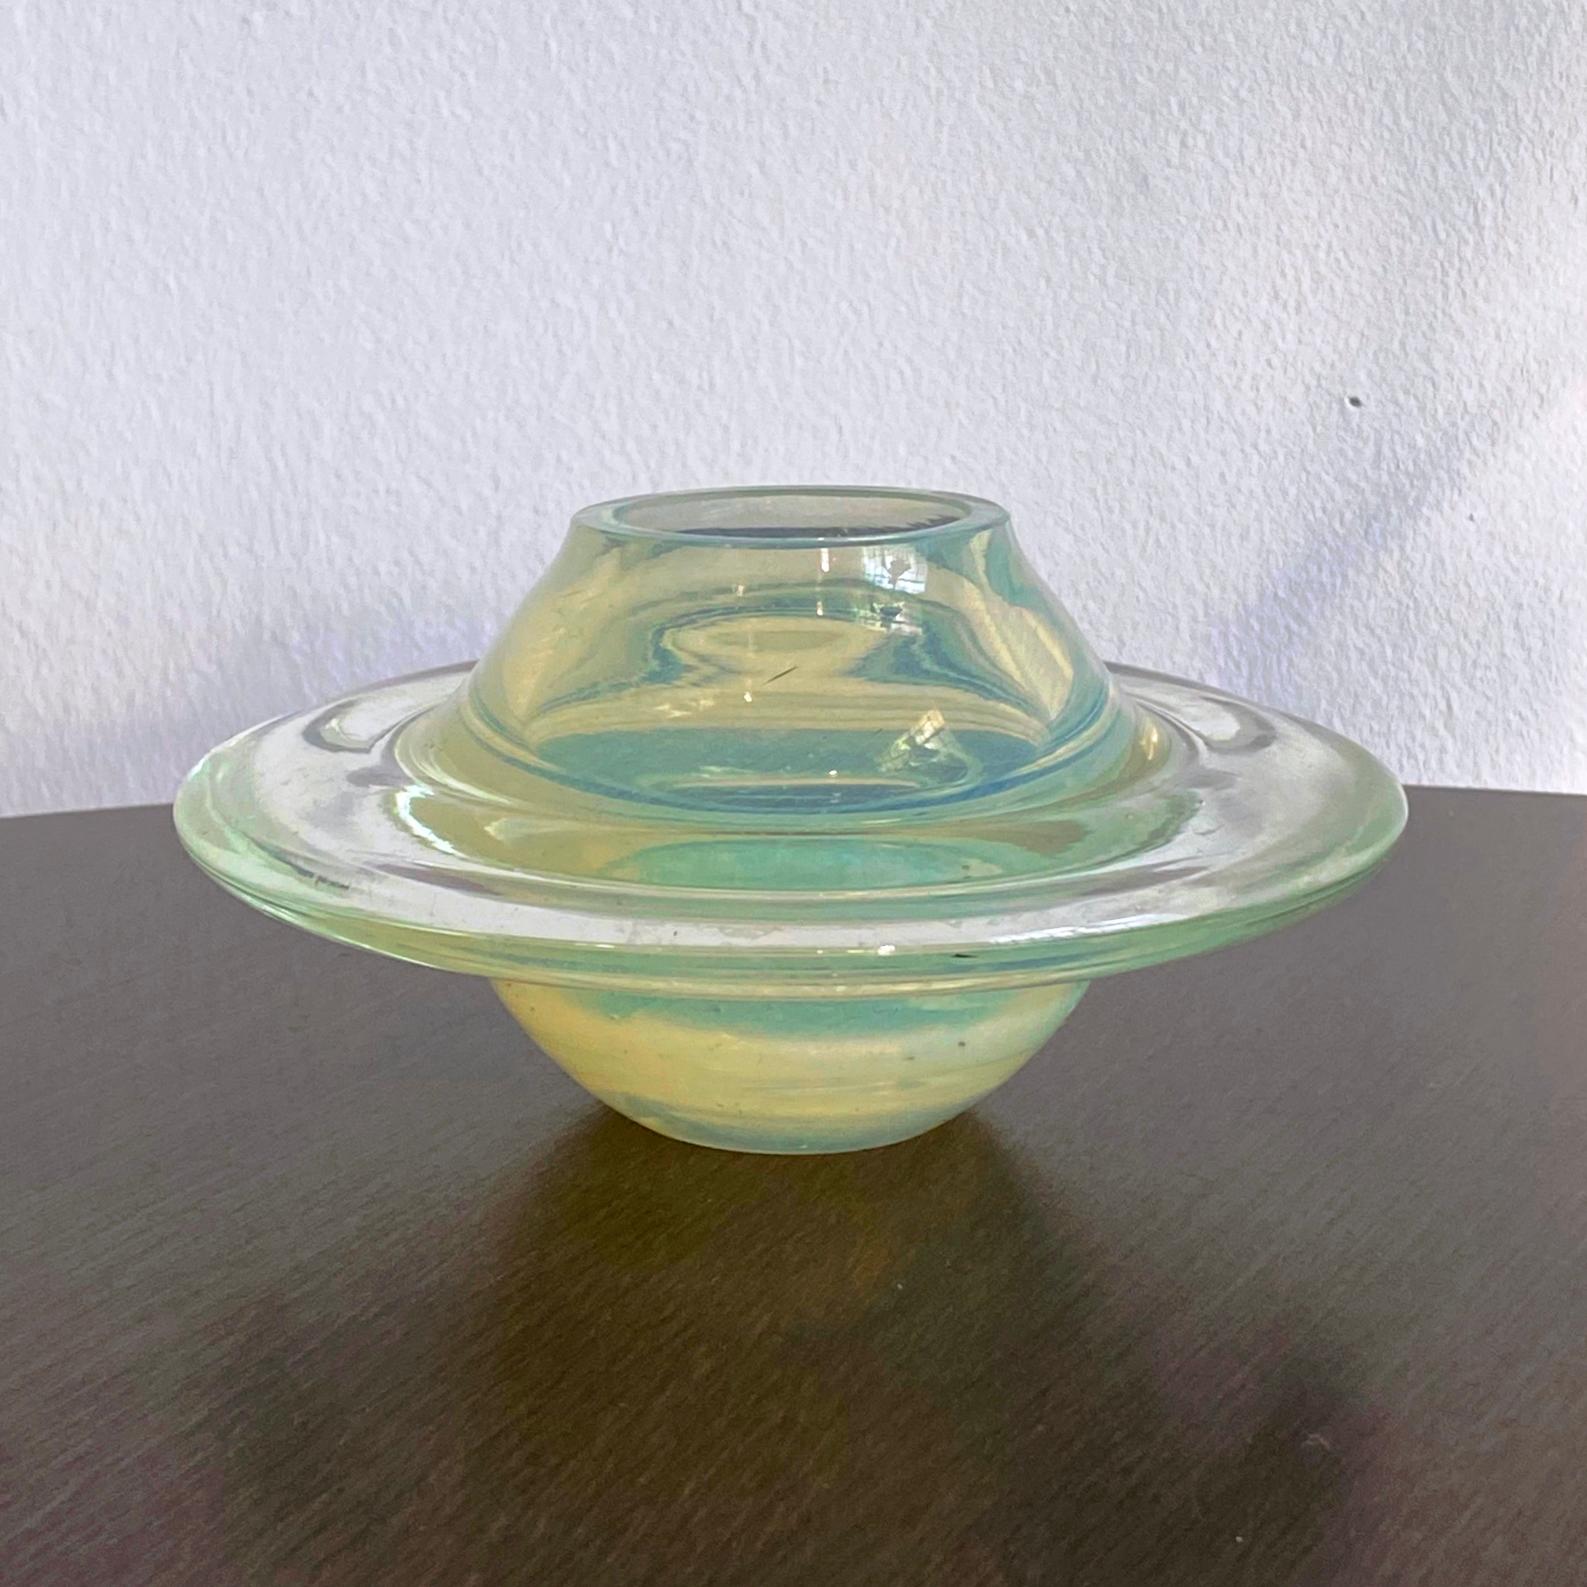 Table or vitrine decoration. Handcrafted, hand-blown Murano glass in the shape of Saturn or flying saucer, space age.
Depending on light source and intensity, the glass color changes from opalescent yellow to greenish. Some marks of use on the